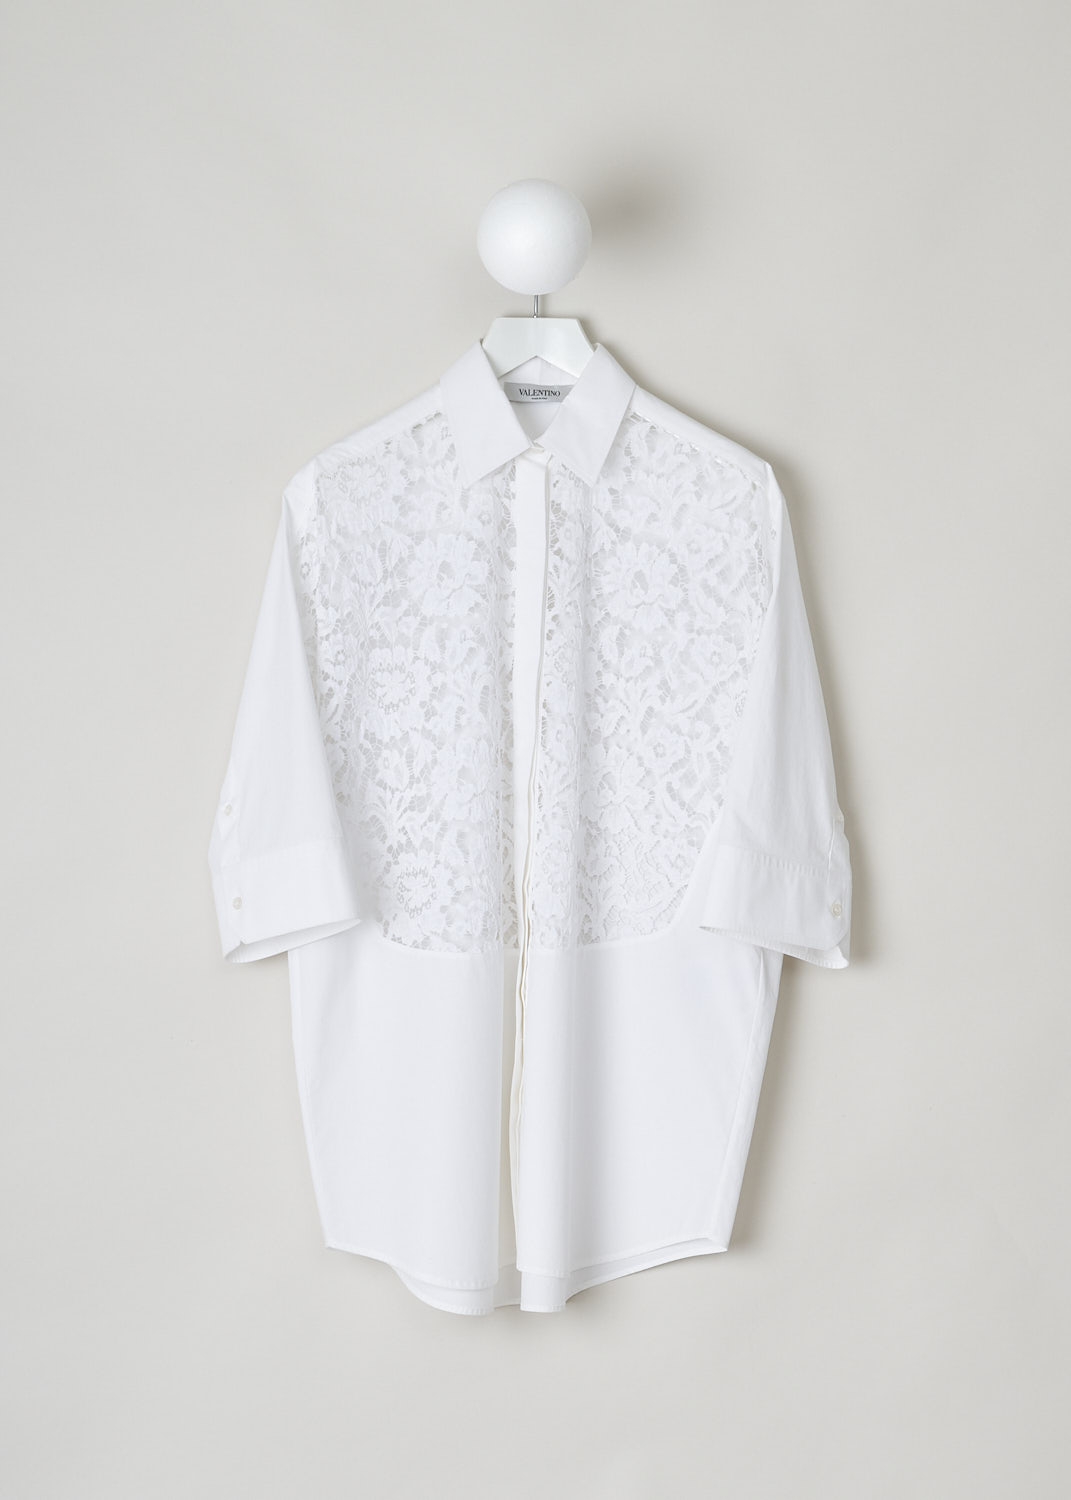 VALENTINO, WHITE TUNIC BLOUSE WITH LACE UPPER FRONT, WB3AB2P05A6_001, White, Front, This white tunic blouse has a classic collar and a concealed front button closure. The three quarter sleeves have buttoned cuffs. The upper front of the tunic is is made with see-through lace, extending partly to the sleeves. The tunic has a straight hemline. In the back, a centre box pleat can be found. The tunic has a wider silhouette. 
